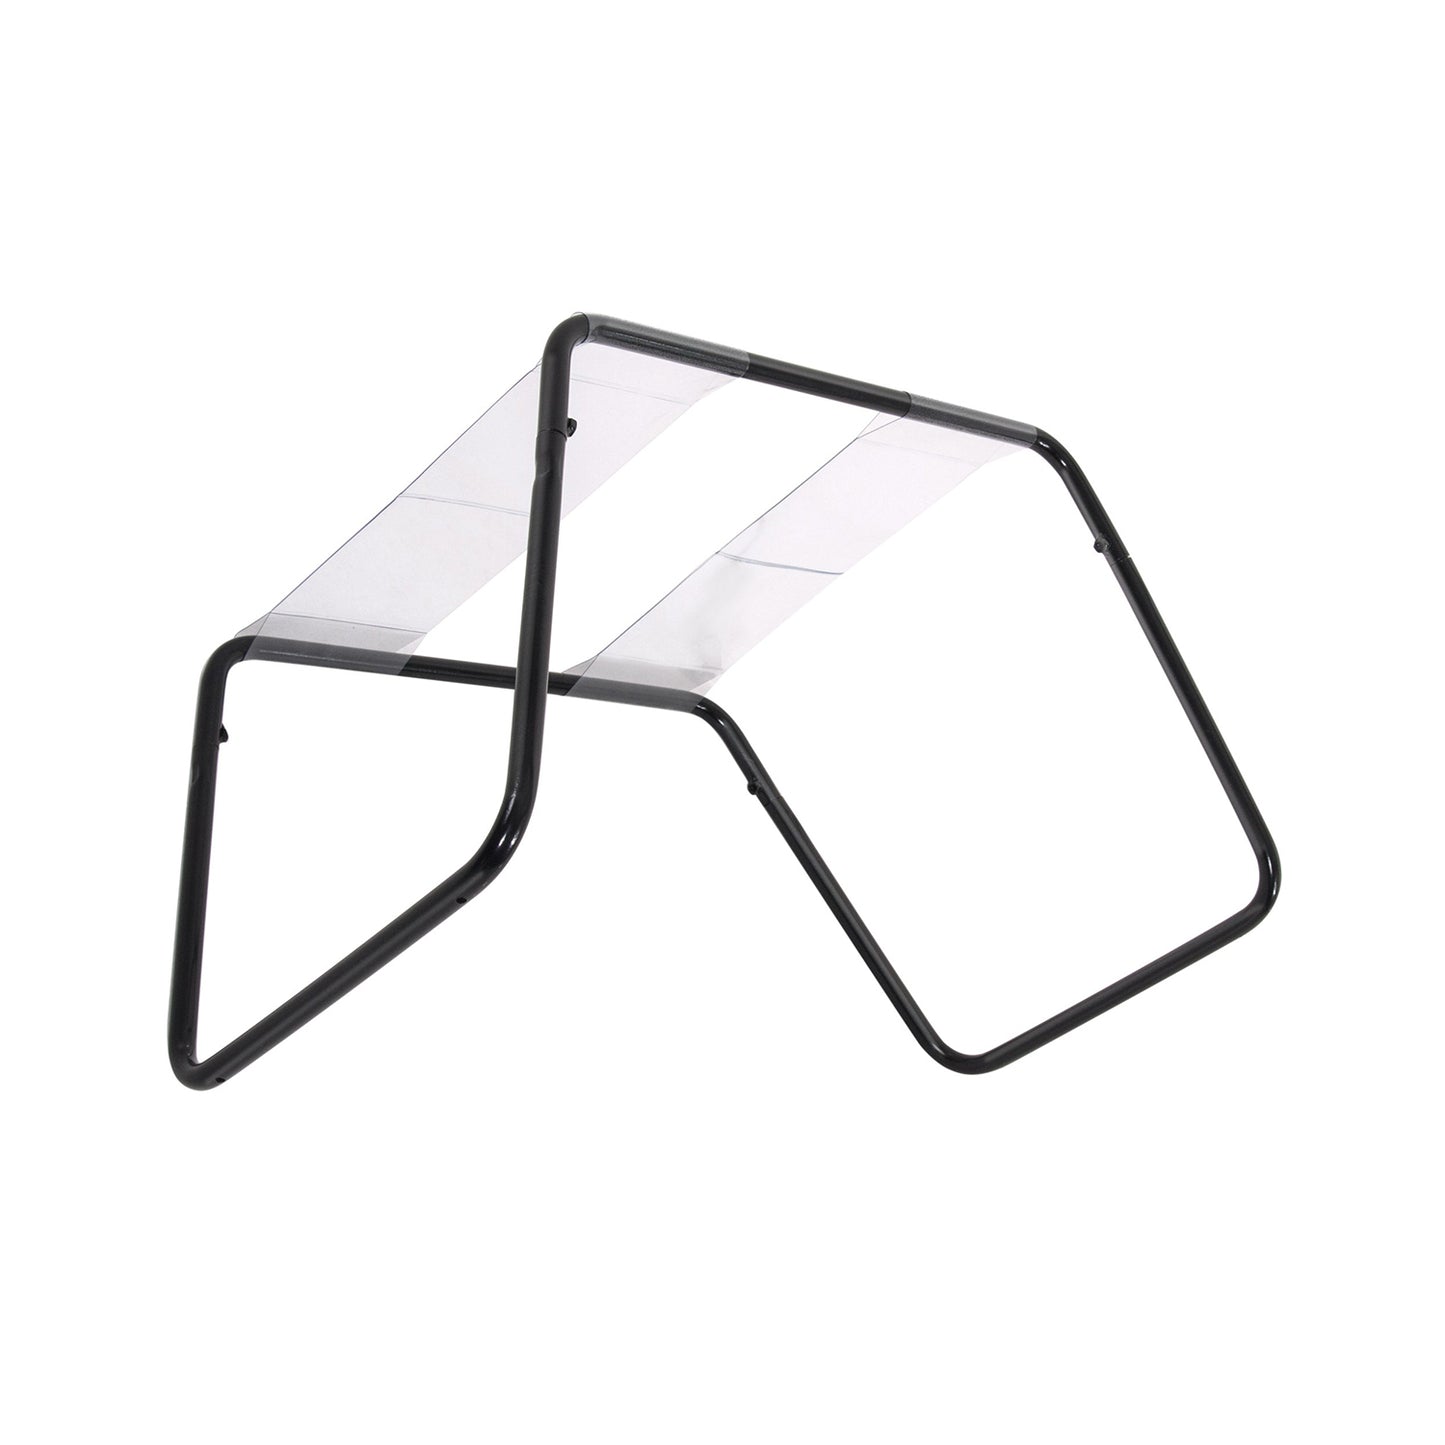 Fetish Fantasy Series The Incredible Sex Stool - Clear/Black